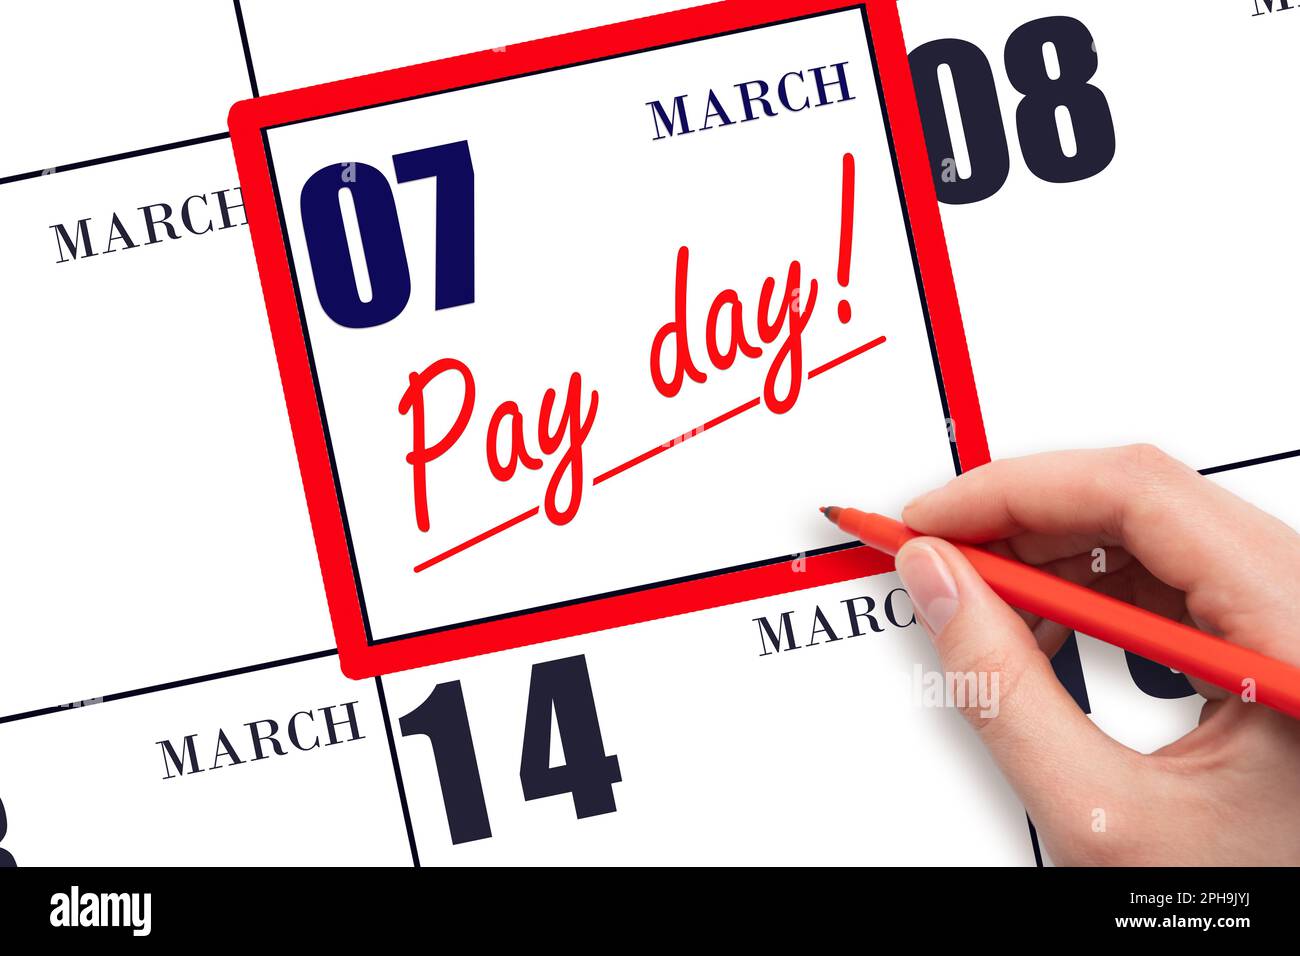 7th day of March. Hand writing text PAY DATE on calendar date March 7 and underline it. Payment due date.  Reminder concept of payment. Spring month, Stock Photo